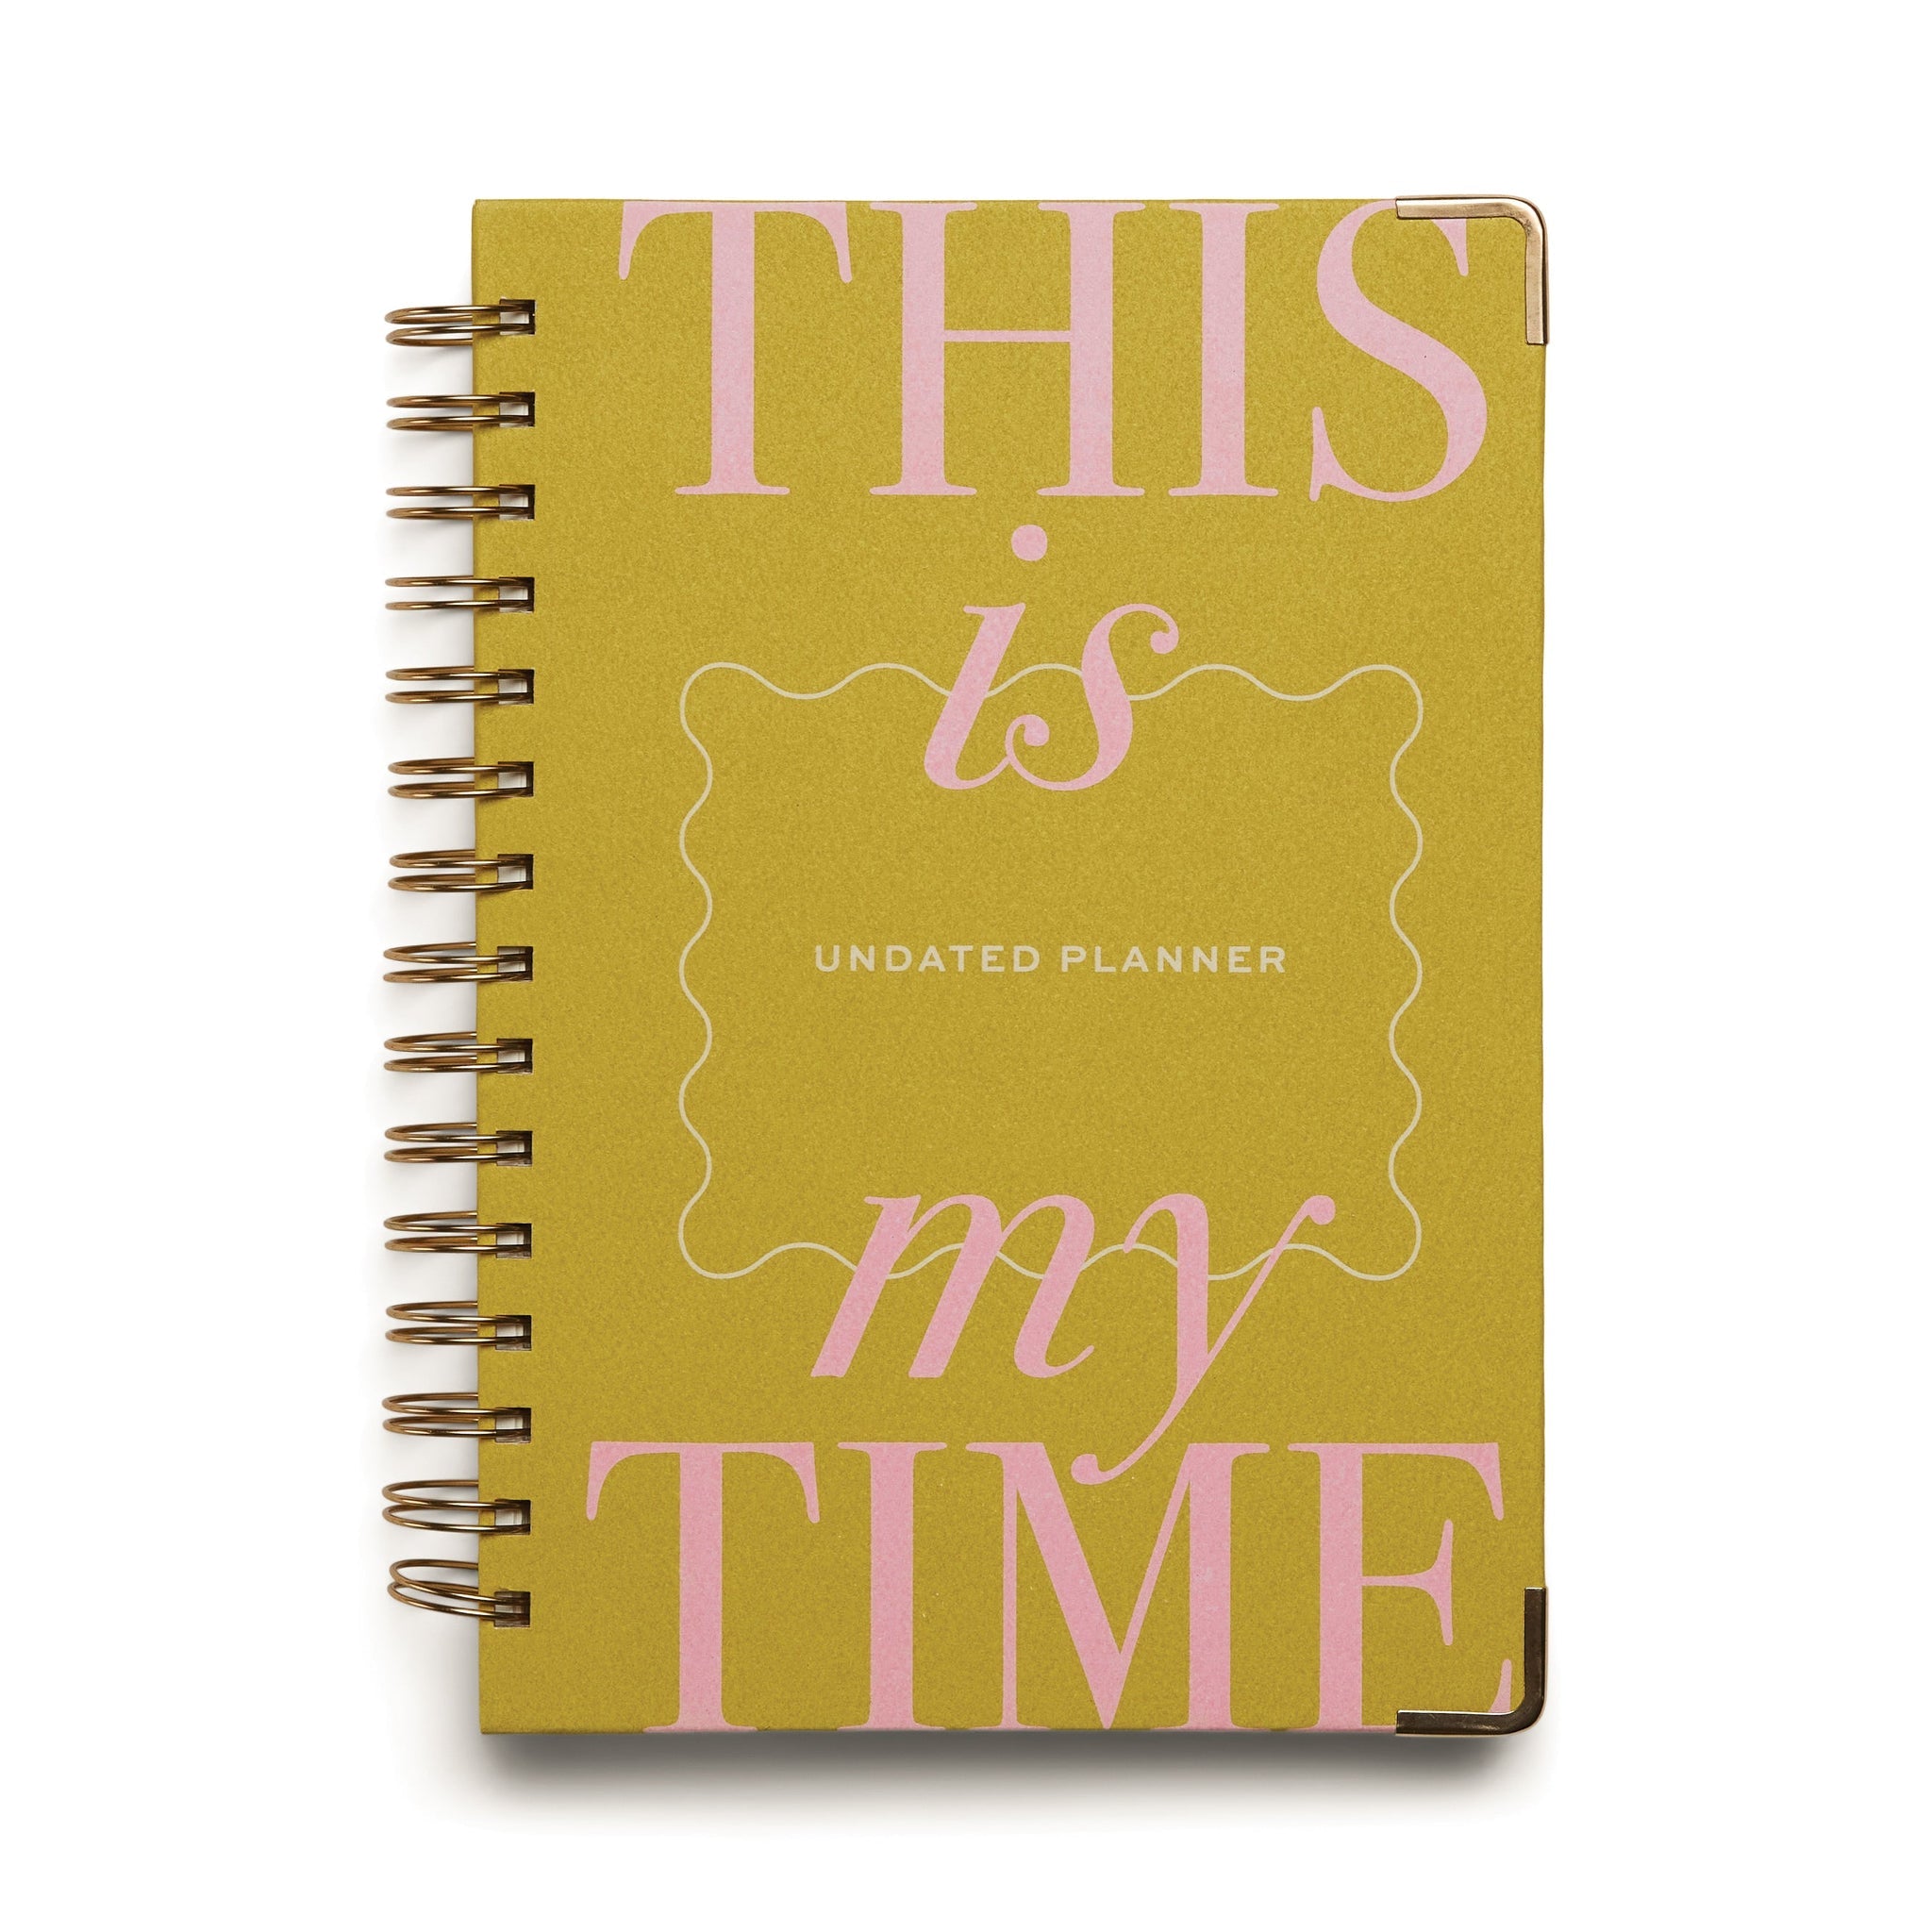 Undated Daily Planner - My Time